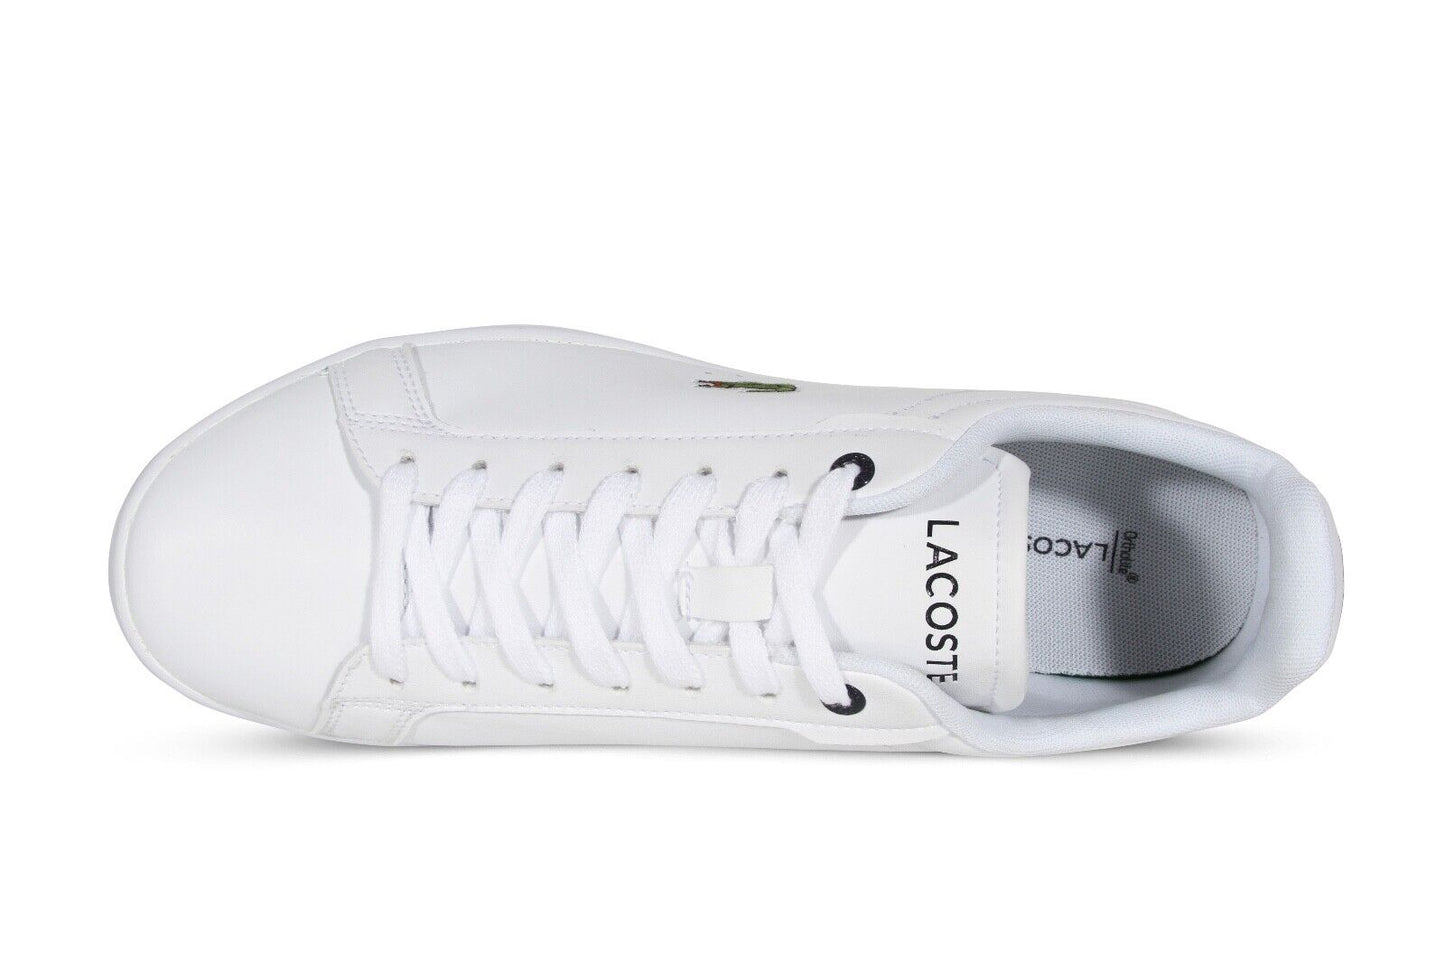 Lacoste Carnaby Pro BL23 1 SMA Men’s Sneakers in White 745SMA0110042